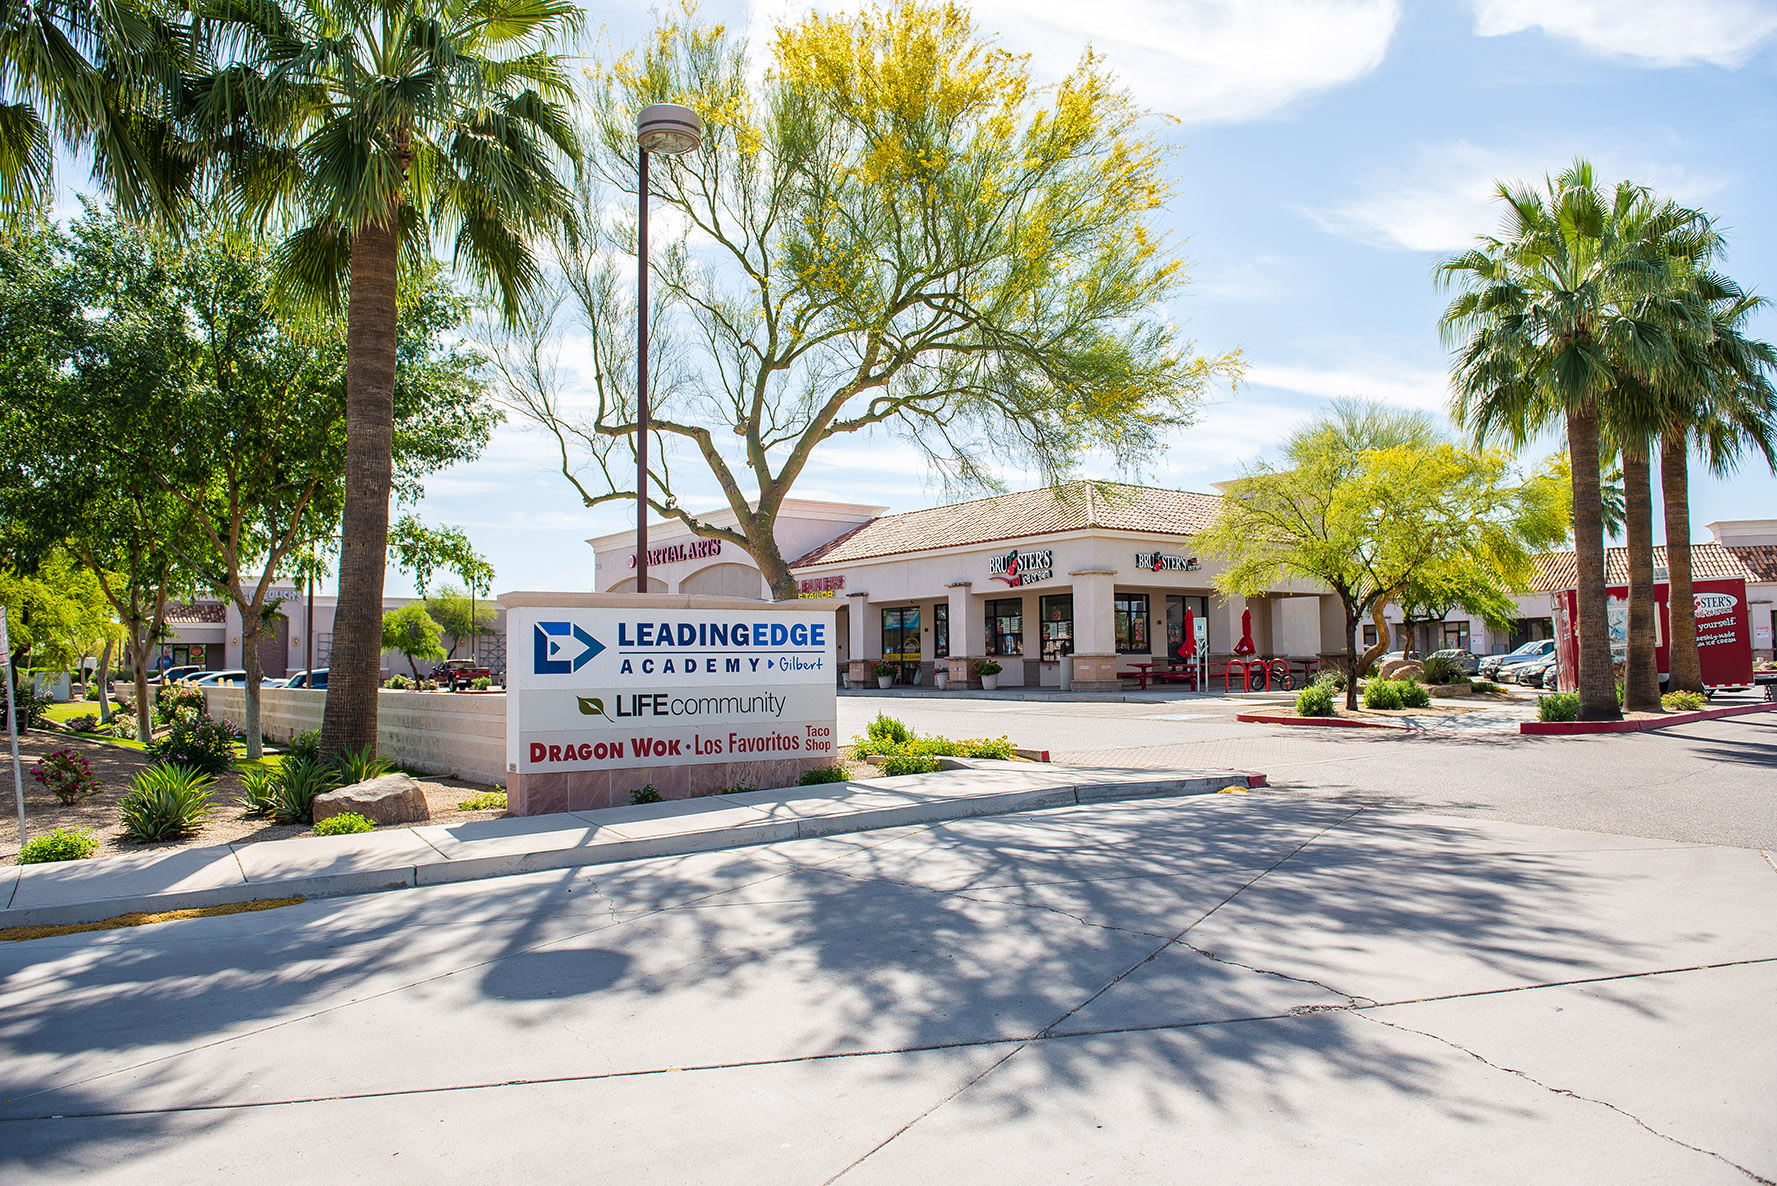 Velocity Retail Group’s Investment Division Completes Multi-Million Dollar Investment Sale of Cooper Square in Gilbert, Arizona 4